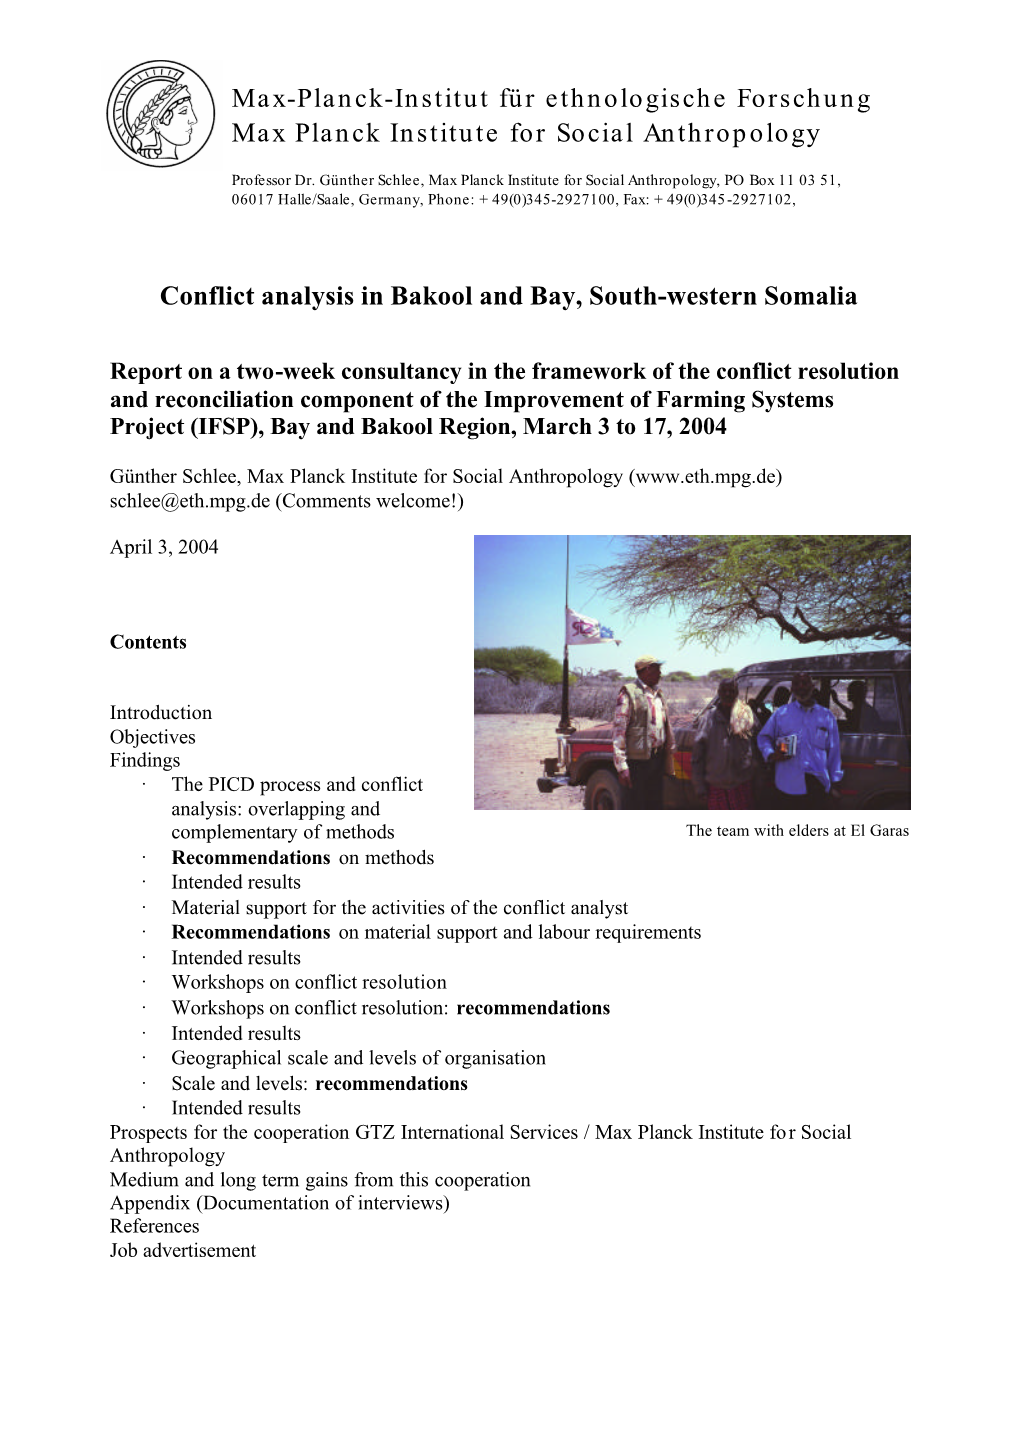 Conflict Analysis in Bakool and Bay, South-Western Somalia